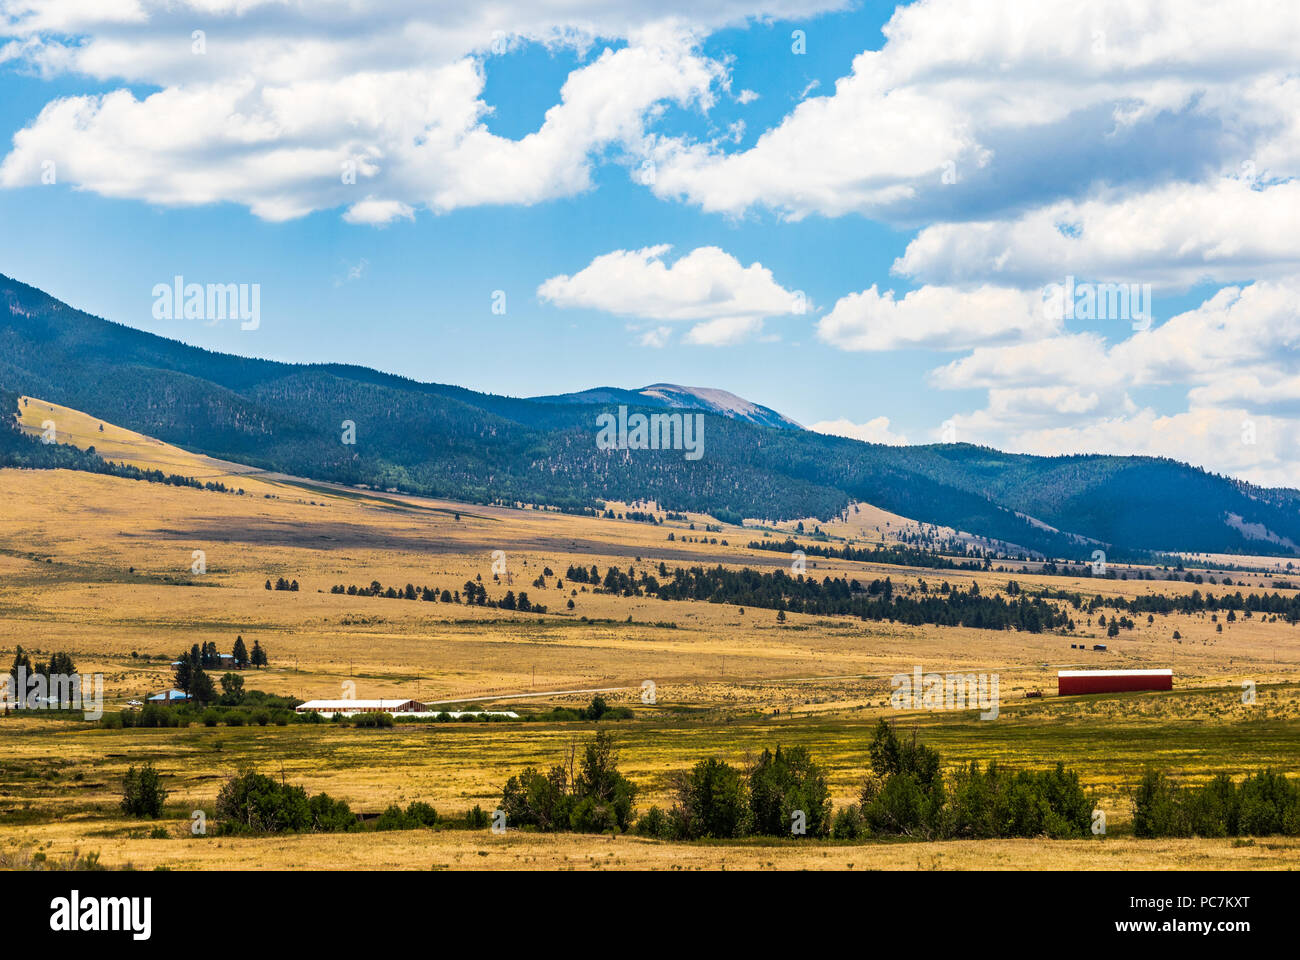 TAOS, NM, USA-8 JULY  18: A mountain farmland scene in northwest New Mexico  near Taos includes  a red barn and other buildings in the midground. Stock Photo